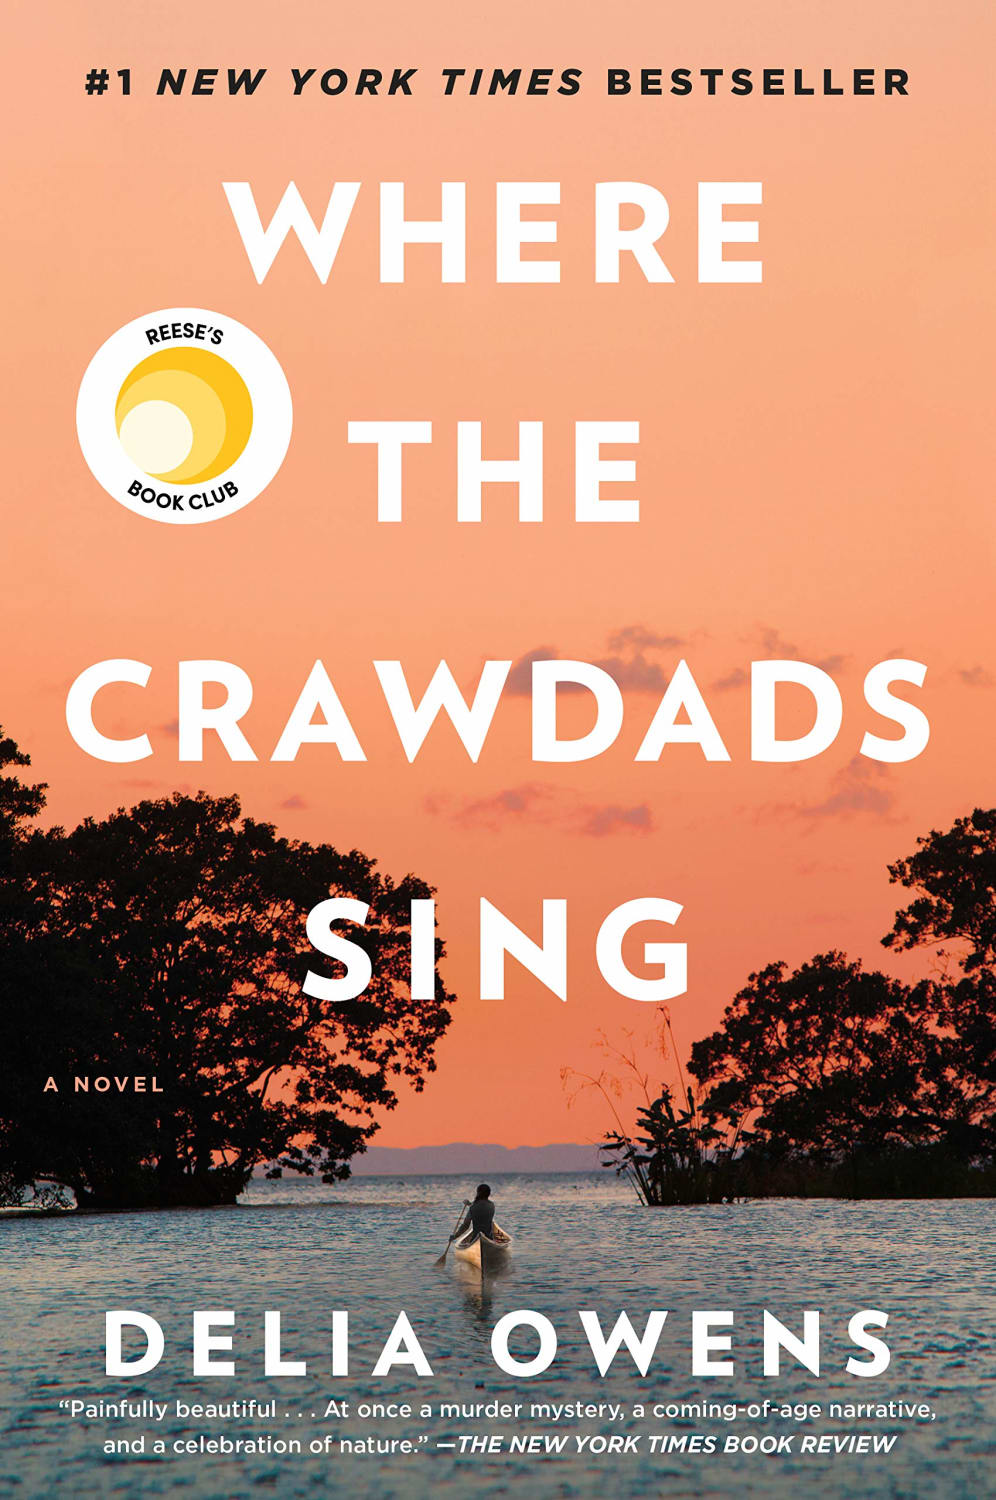 'Where the Crawdads Sing' Top Seller So Far in 2019